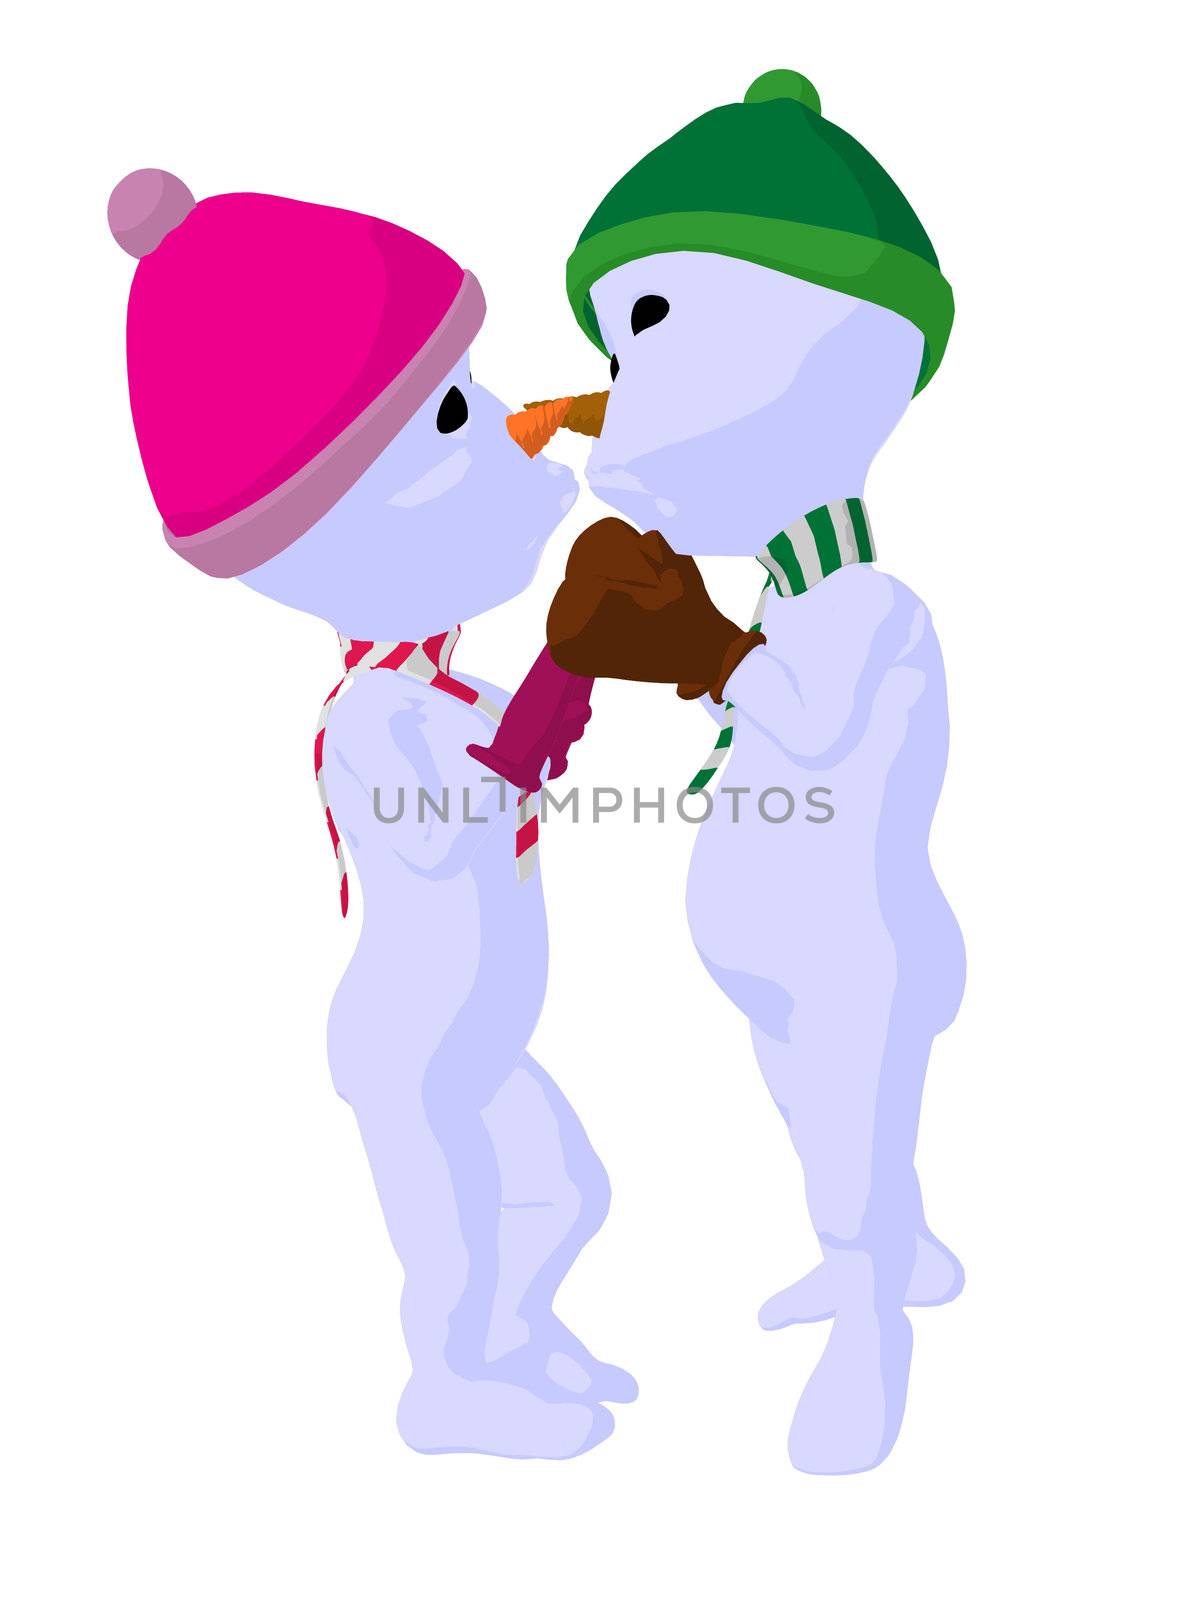 Snowboy and Snowgirl Couple Art Illustration Silhouette by kathygold